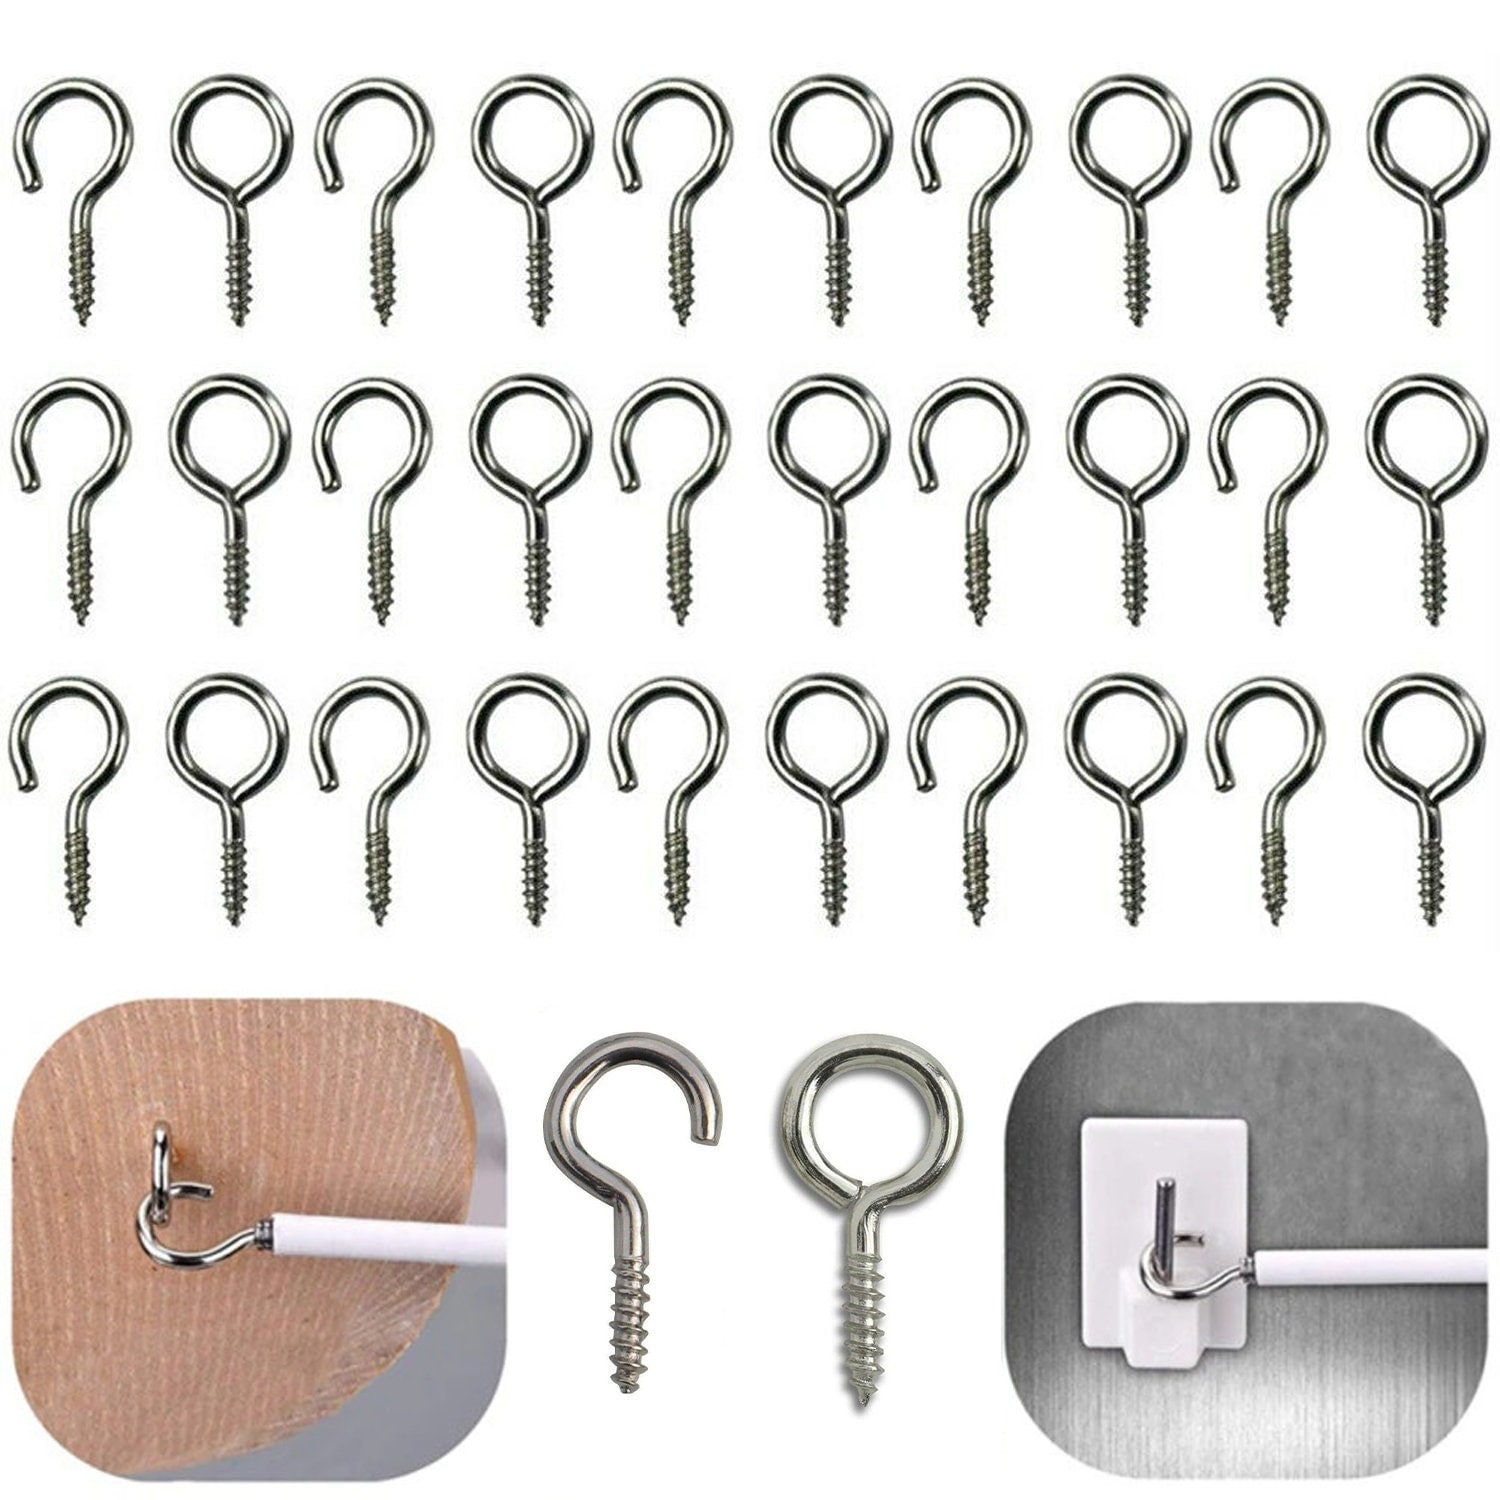 Metal Screw Hooks and Screw in Eyes Bolts, Heavy Duty Screw in Eye Hooks  for Indoor & Outdoor, DIY Craft, Keychain, Hanging Frame 